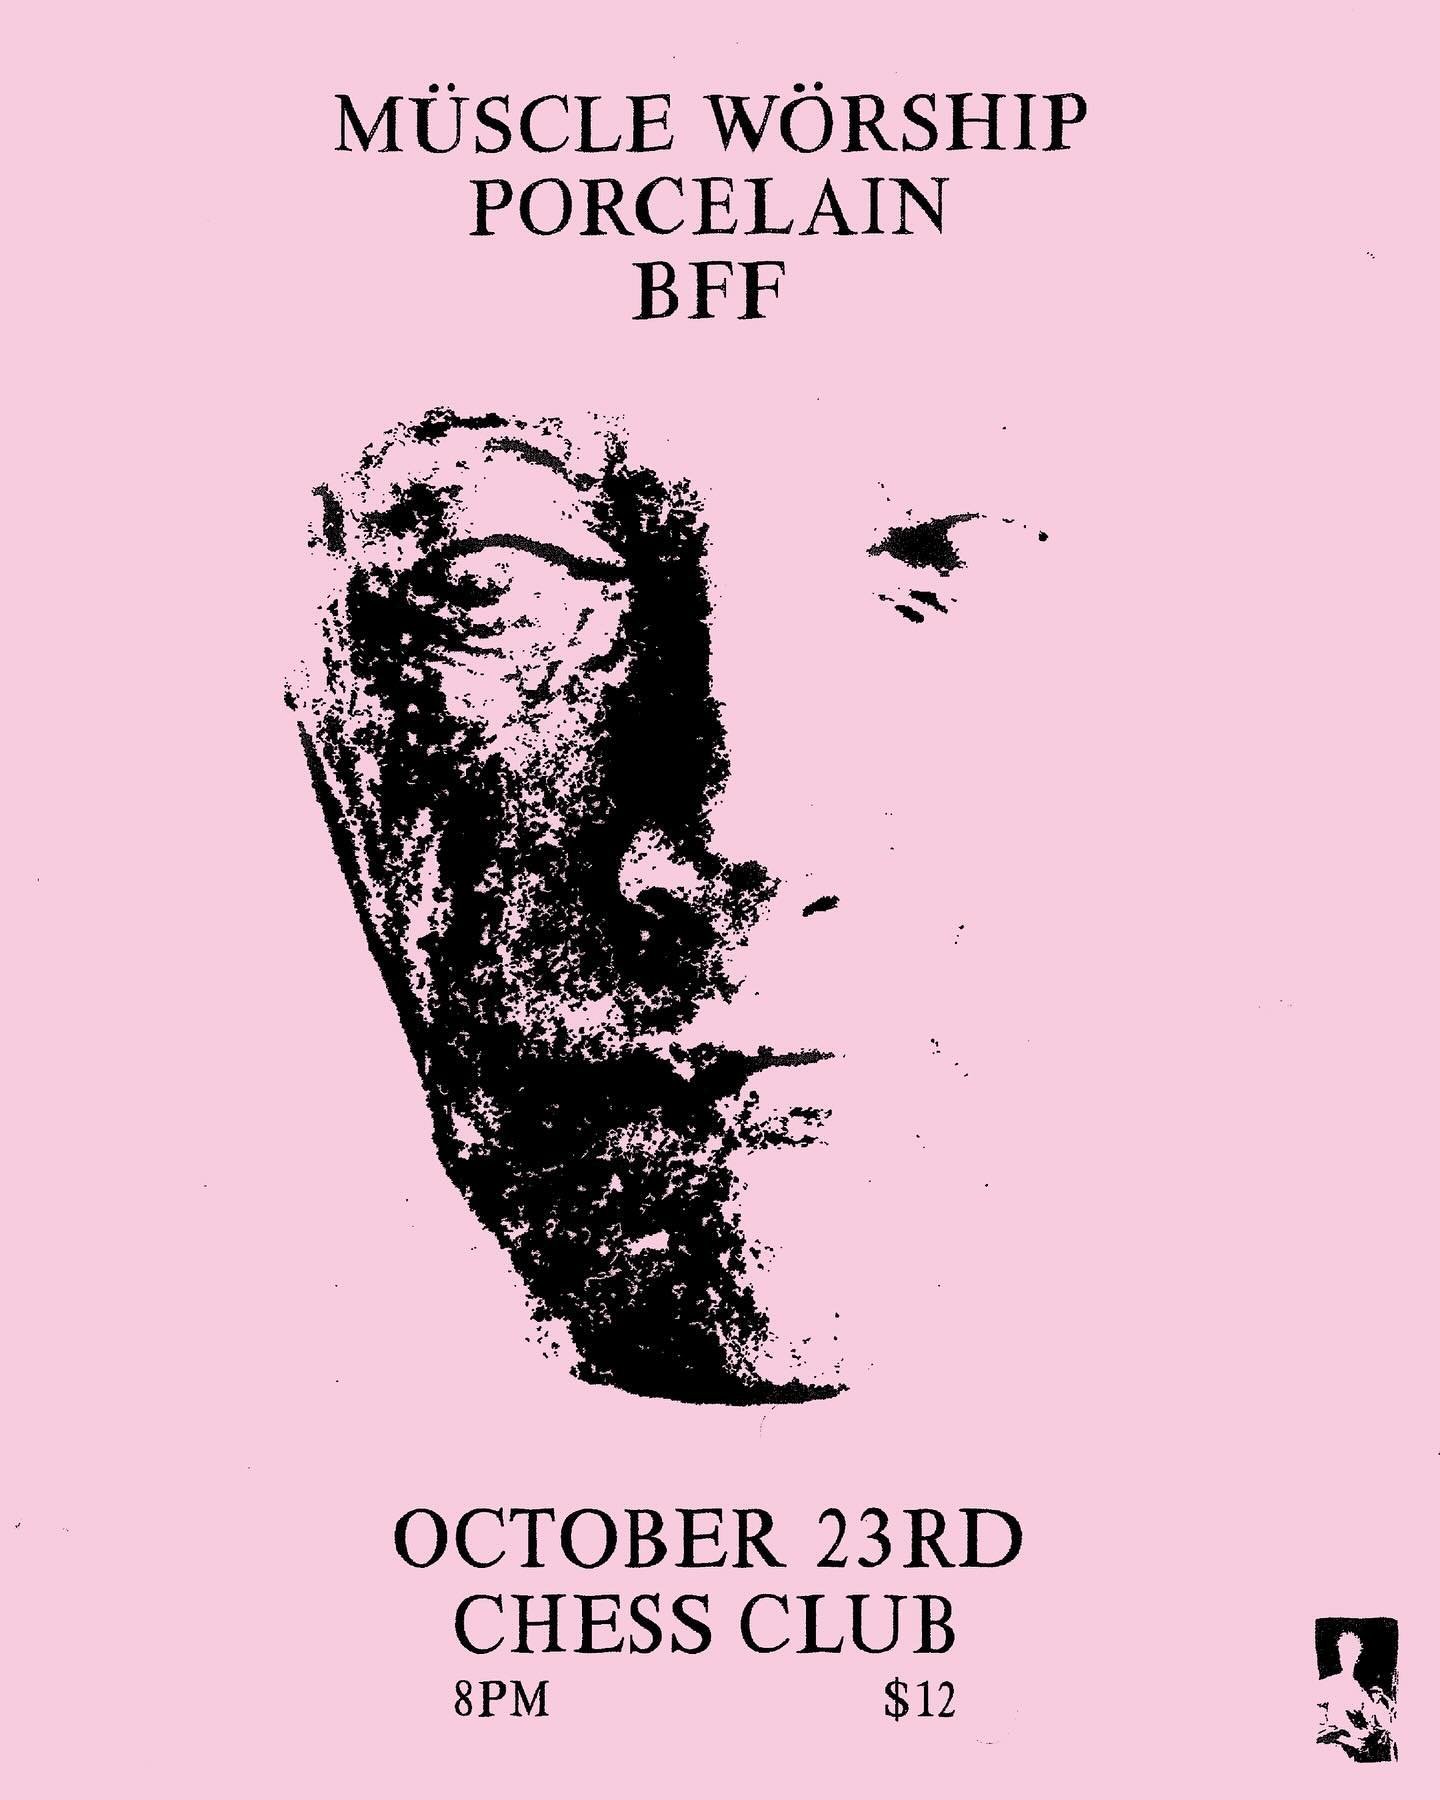 PORTRAYAL OF GUILT PRESENTS&hellip;

M&Uuml;SCLE W&Ouml;RSHIP (Lawrence, KS)
PORCELAIN
BFF

OCT 23
CHESS CLUB
DOORS AT 8PM
$12

TICKETS AT THE DOOR ONLY